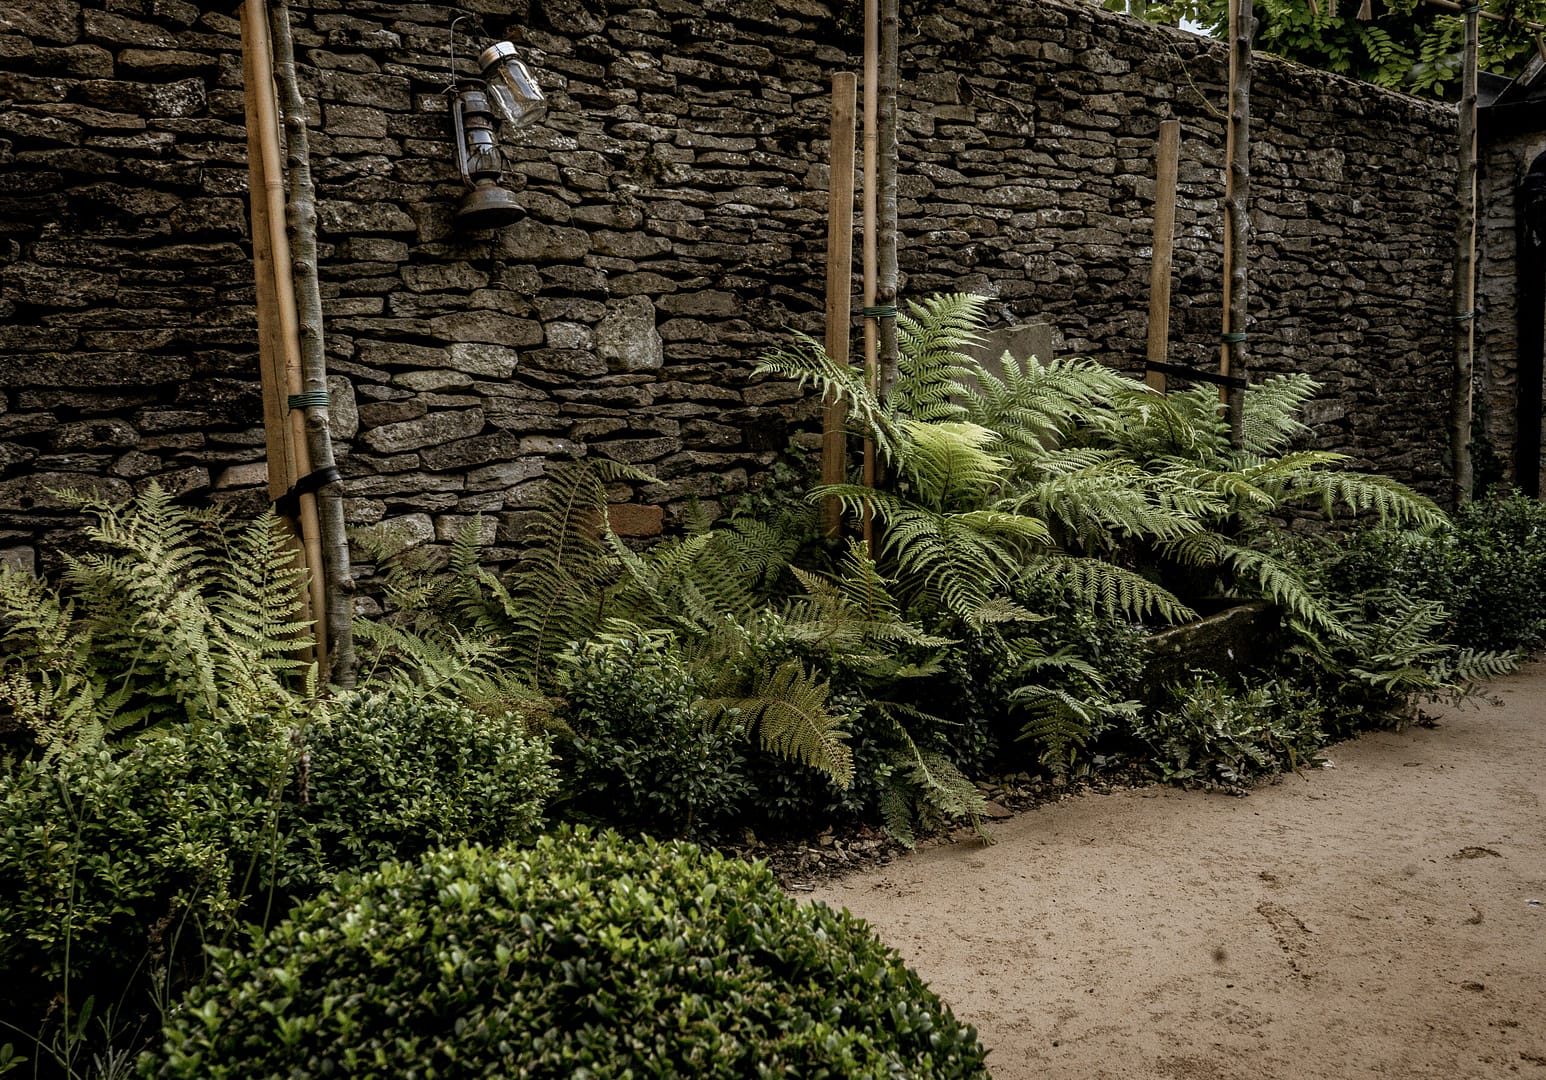 shade garden design with buxus balls, ferns, trees and drystone traditional wall